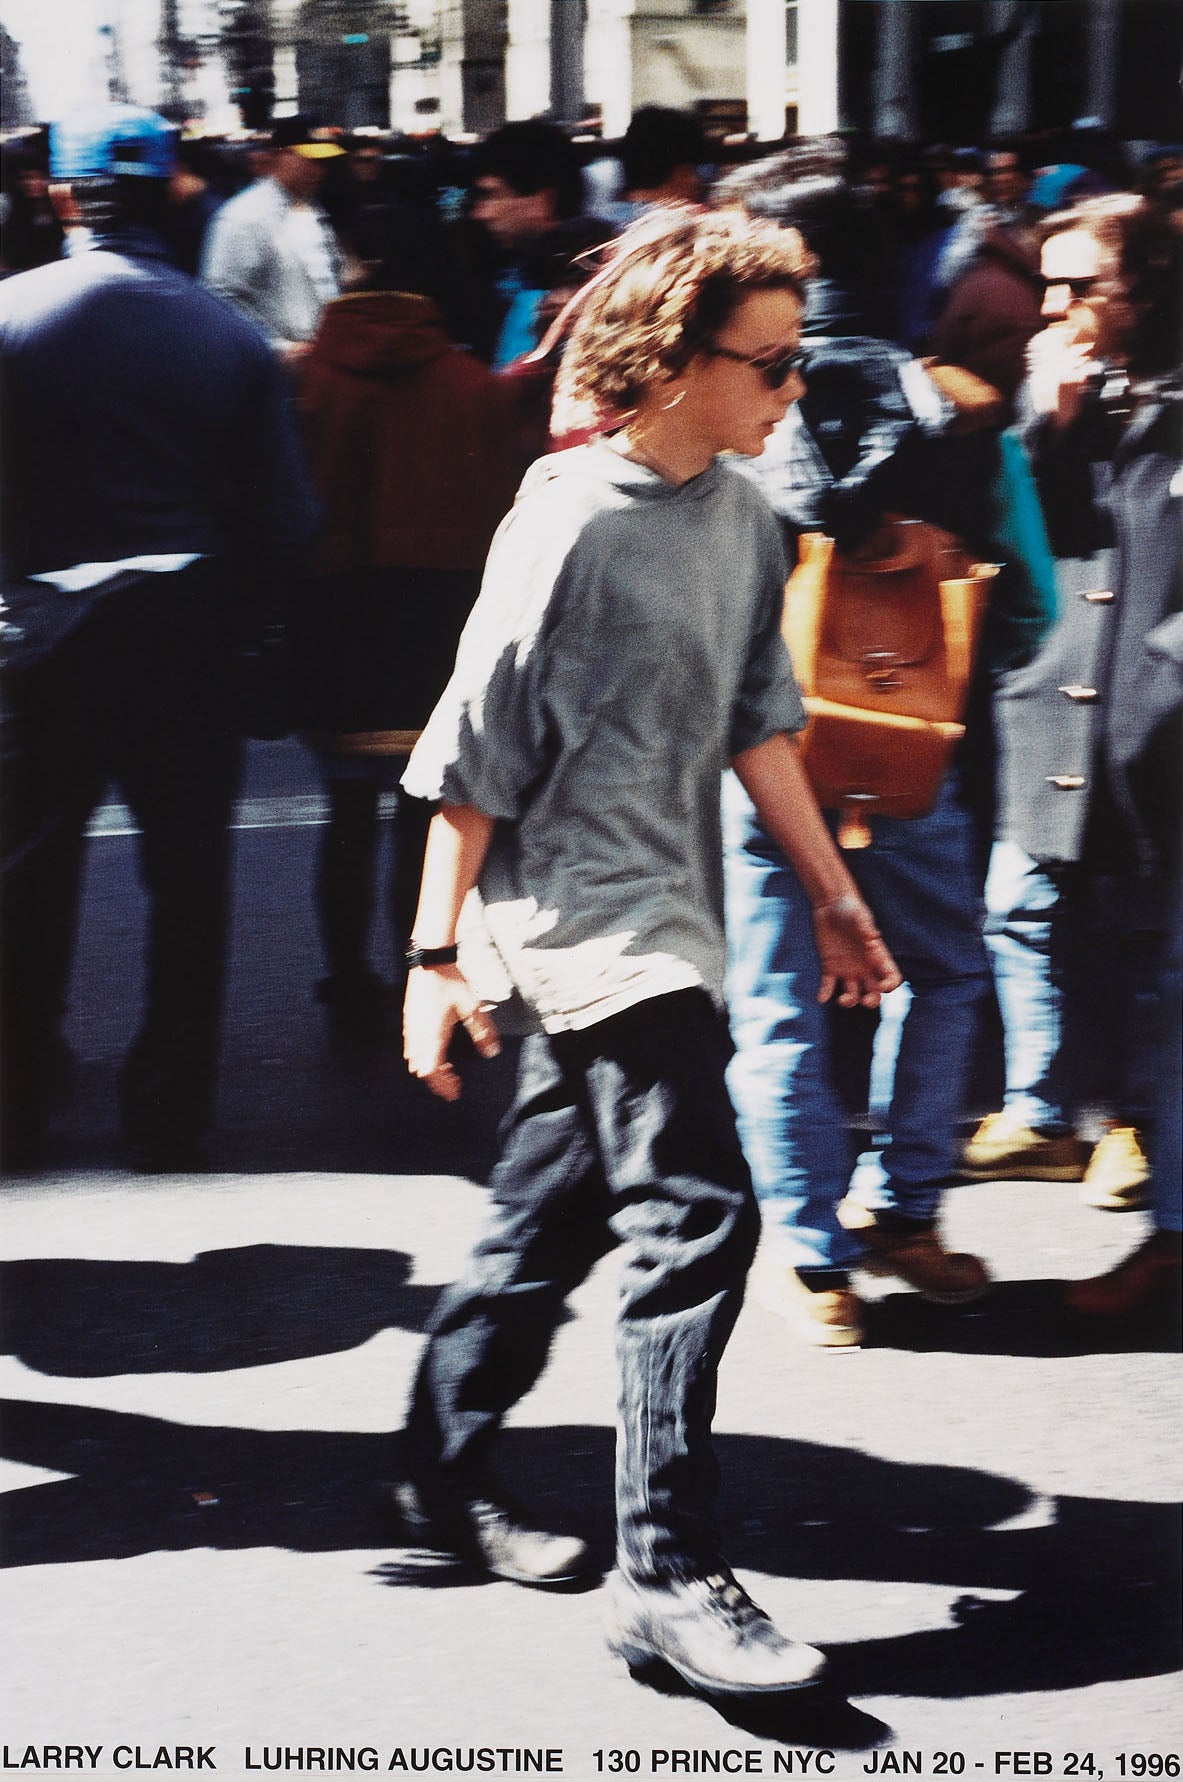 Poster from Larry Clark's 1996 exhibition, featuring a photograph of a youth walking on the street through a crowd. 